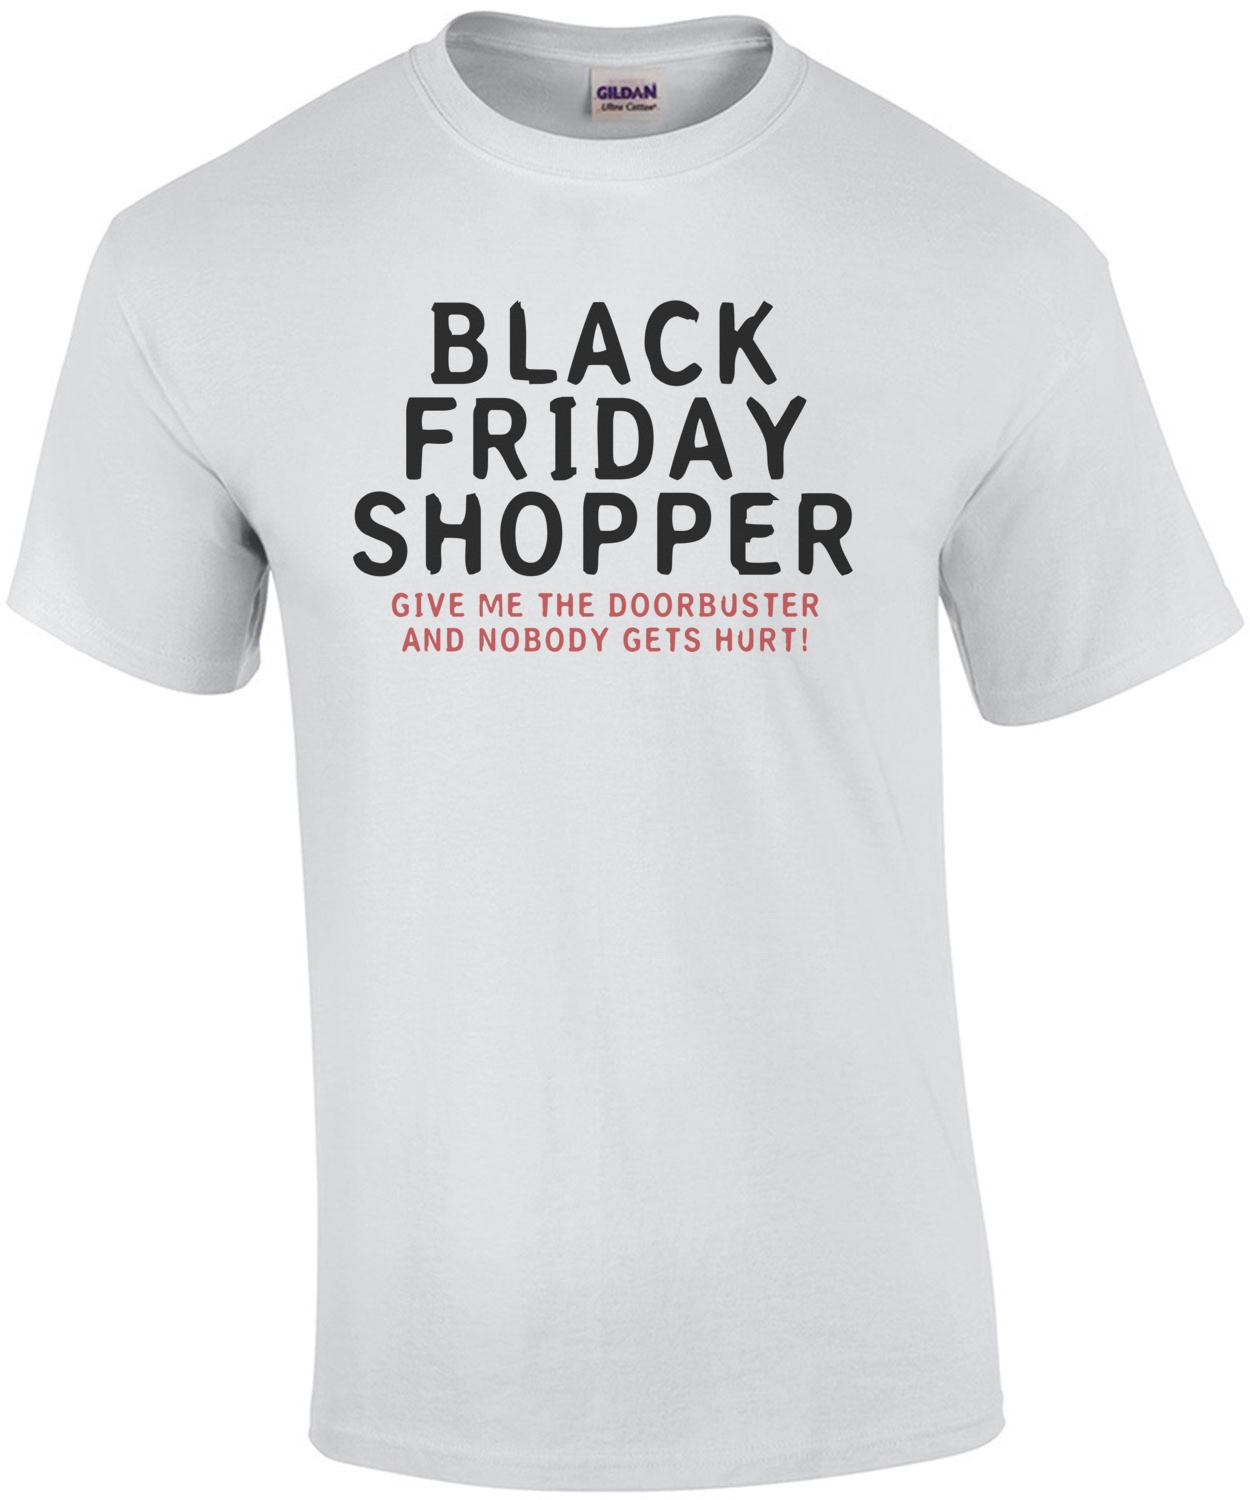 Black Friday Shopper: Give Me The Doorbusters T-Shirt